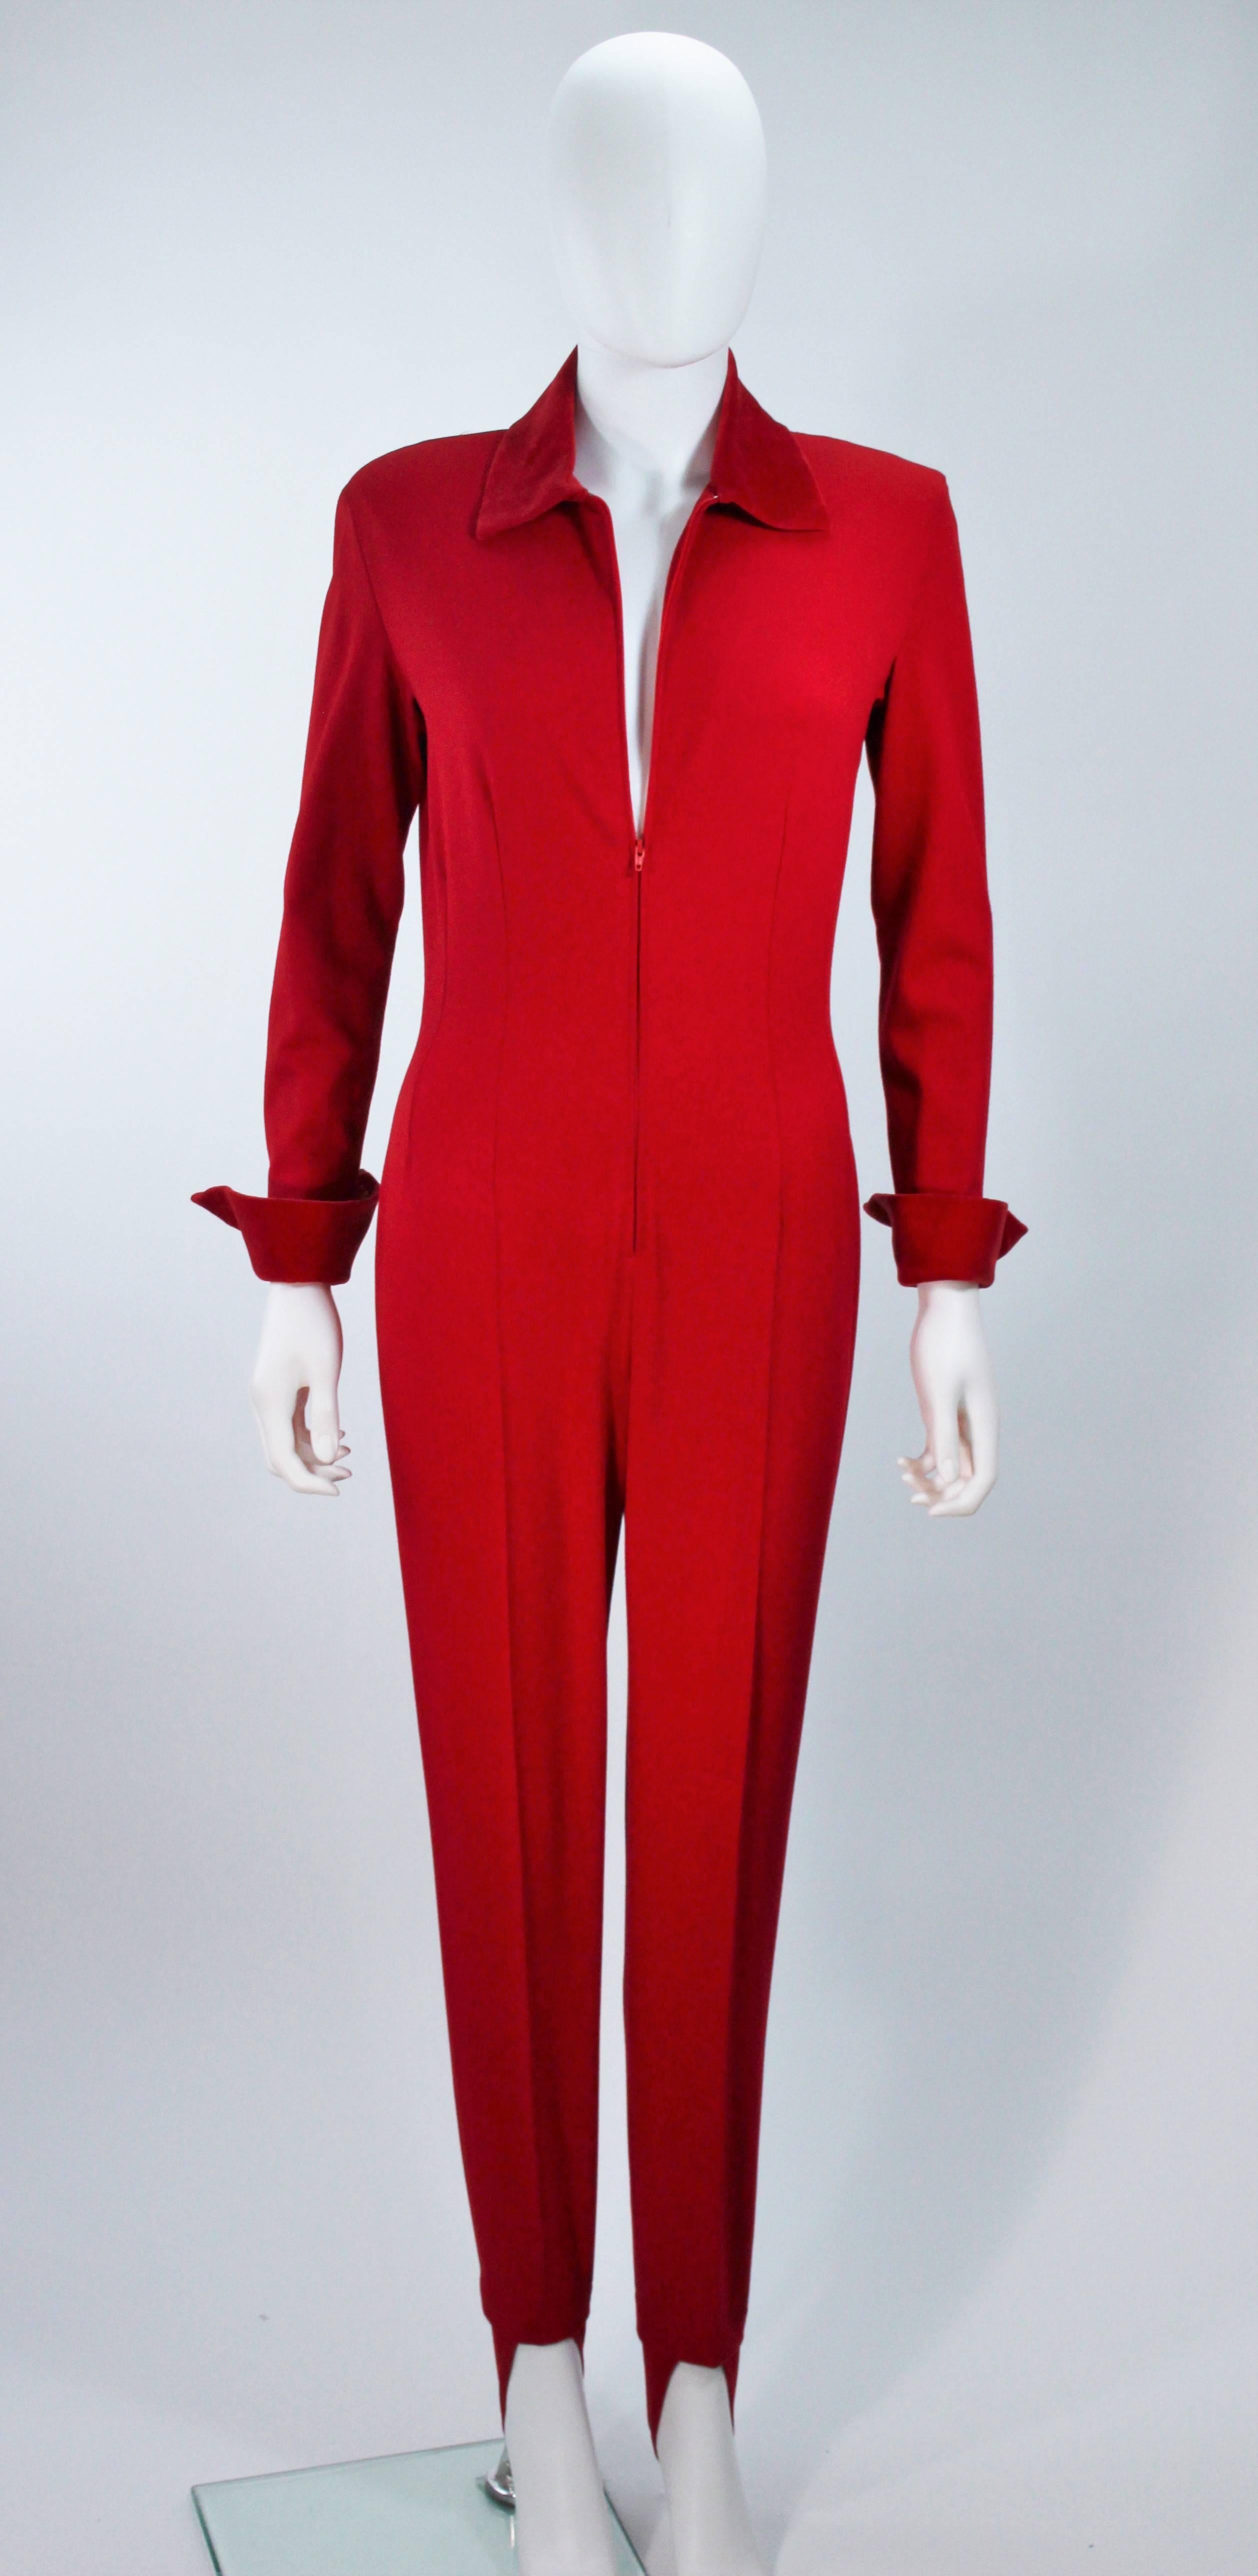  This Moschino d pantsuit is composed of a stretch red wool with velvet trim. Features a center front zipper closure as well as zippered sleeves, and stirrup foot details. In excellent vintage condition. 

  **Please cross-reference measurements